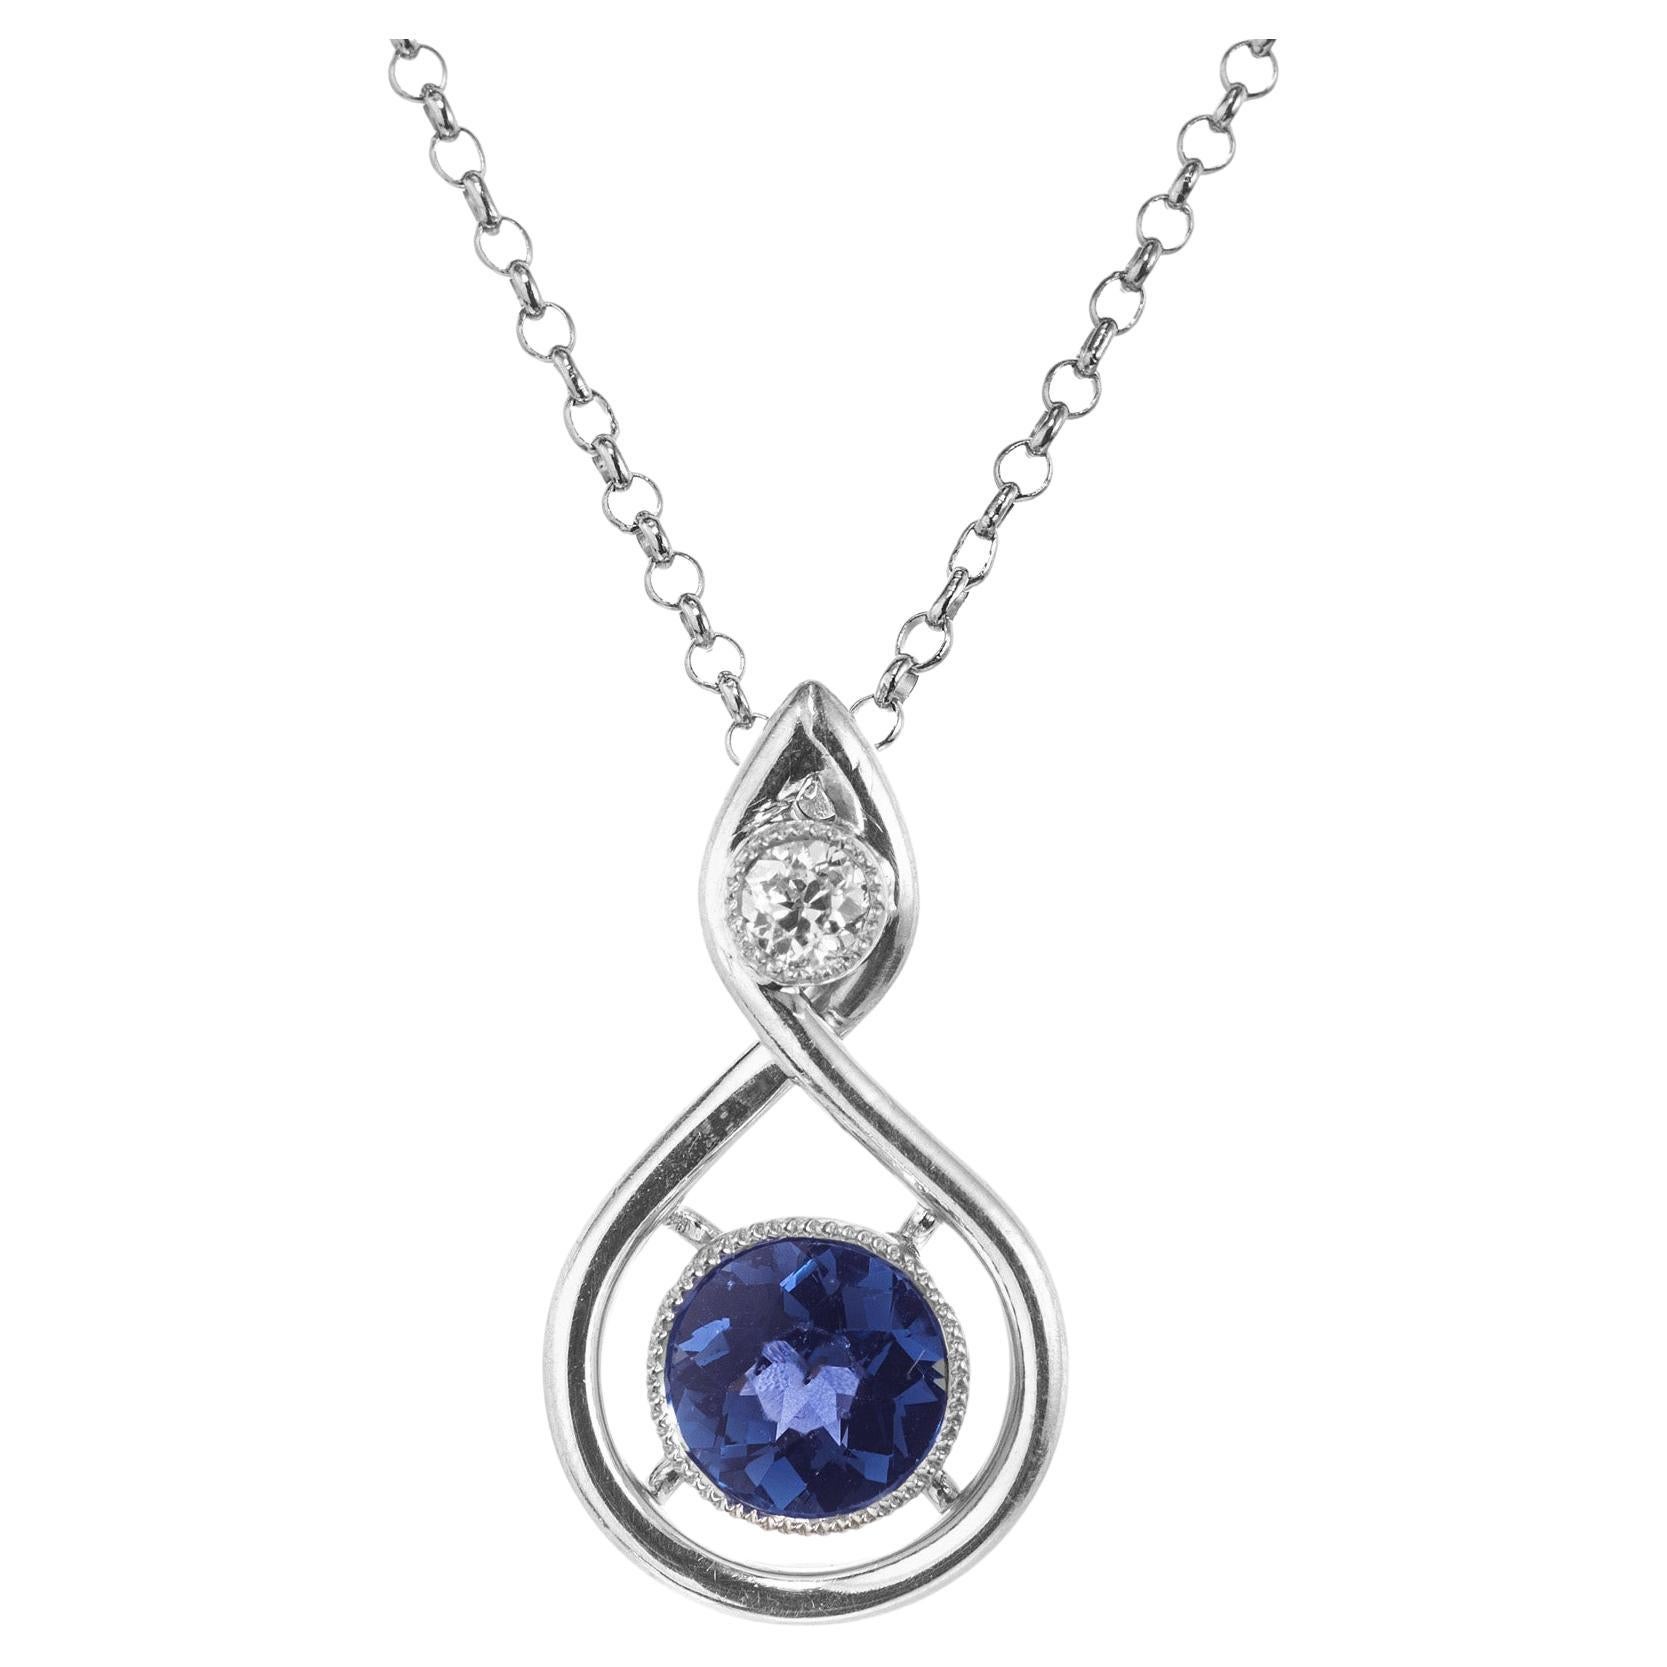 This 1920's Art Deco pendant is set with amazing .43 carat round blue sapphire from Yogo Gulch, Montana. GIA certified in a custom platinum pendant mounting with a .40 round diamond on top. The GIA has certified the sapphire as natural, no heat.